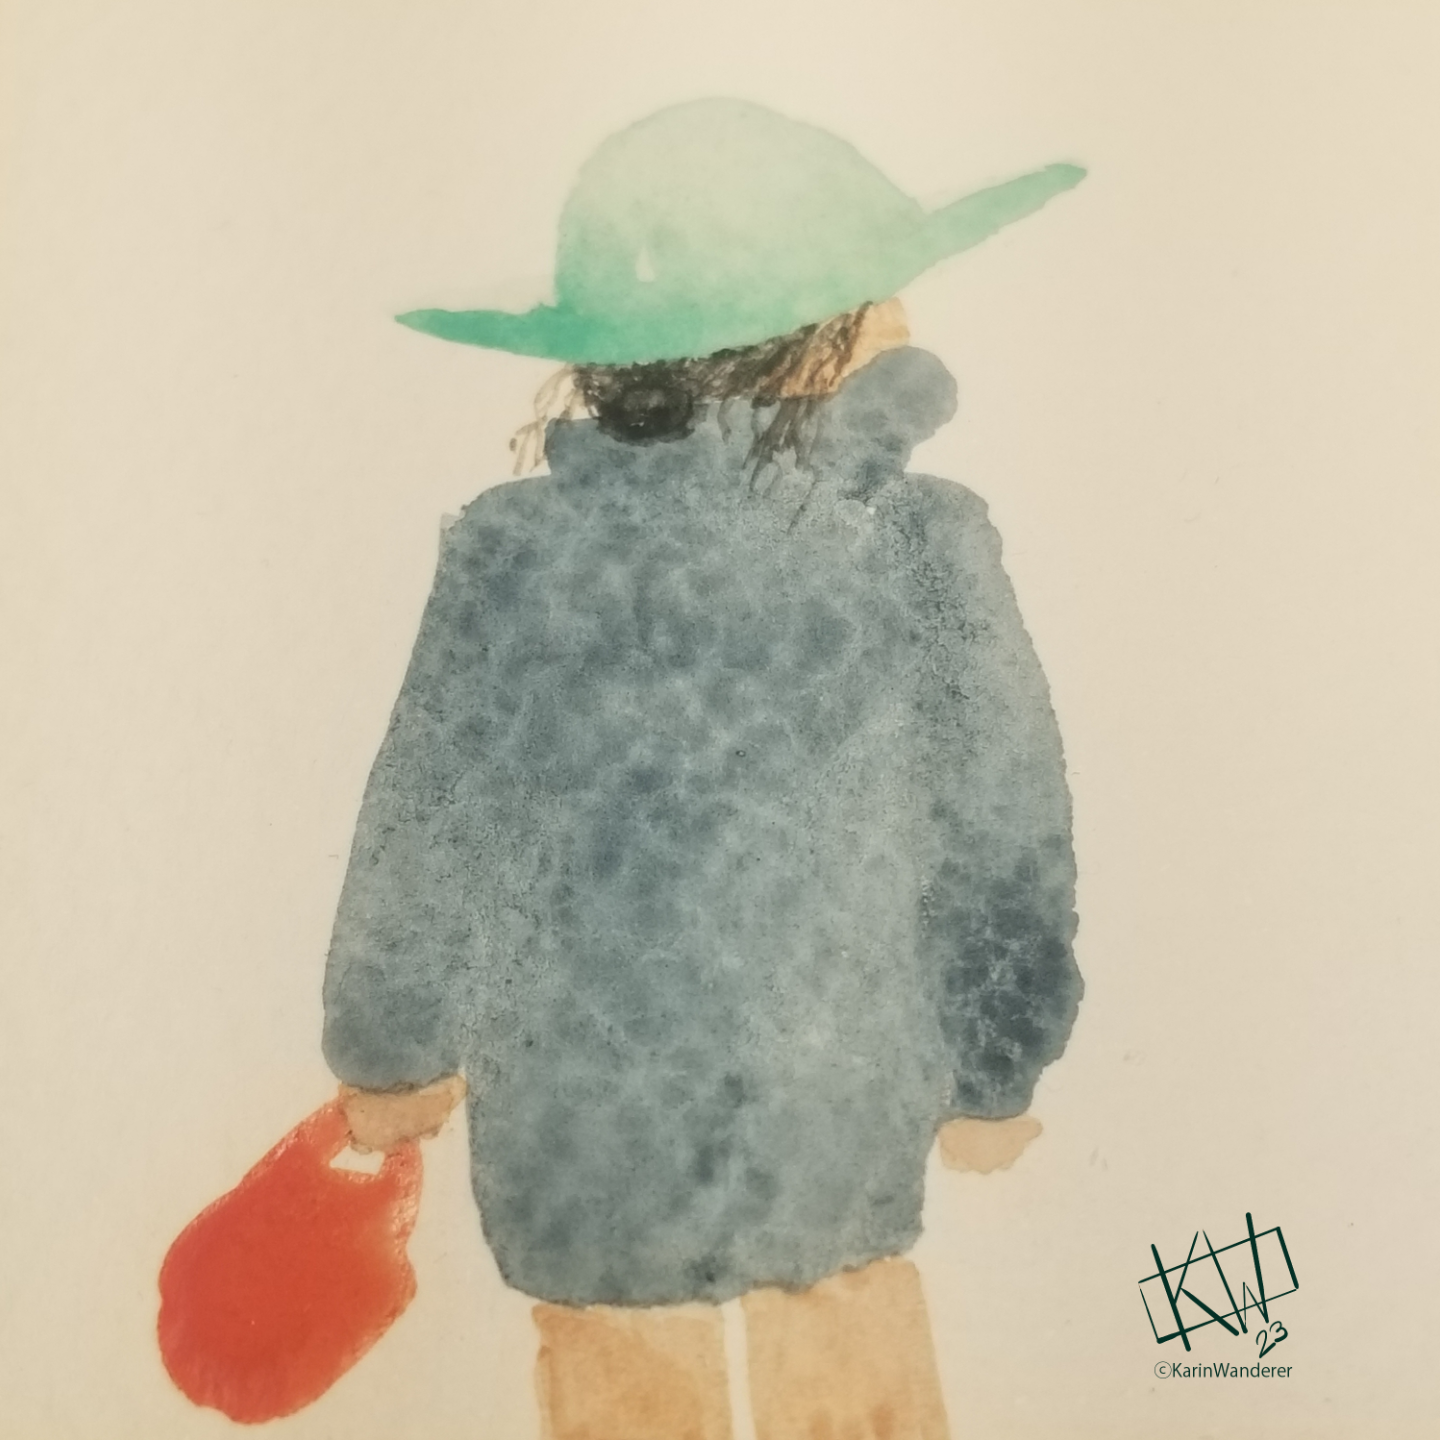 Watercolor person with dark hair drawn into a bun stands, back to viewer. A big blue coat & blue hat obscure most of their features.